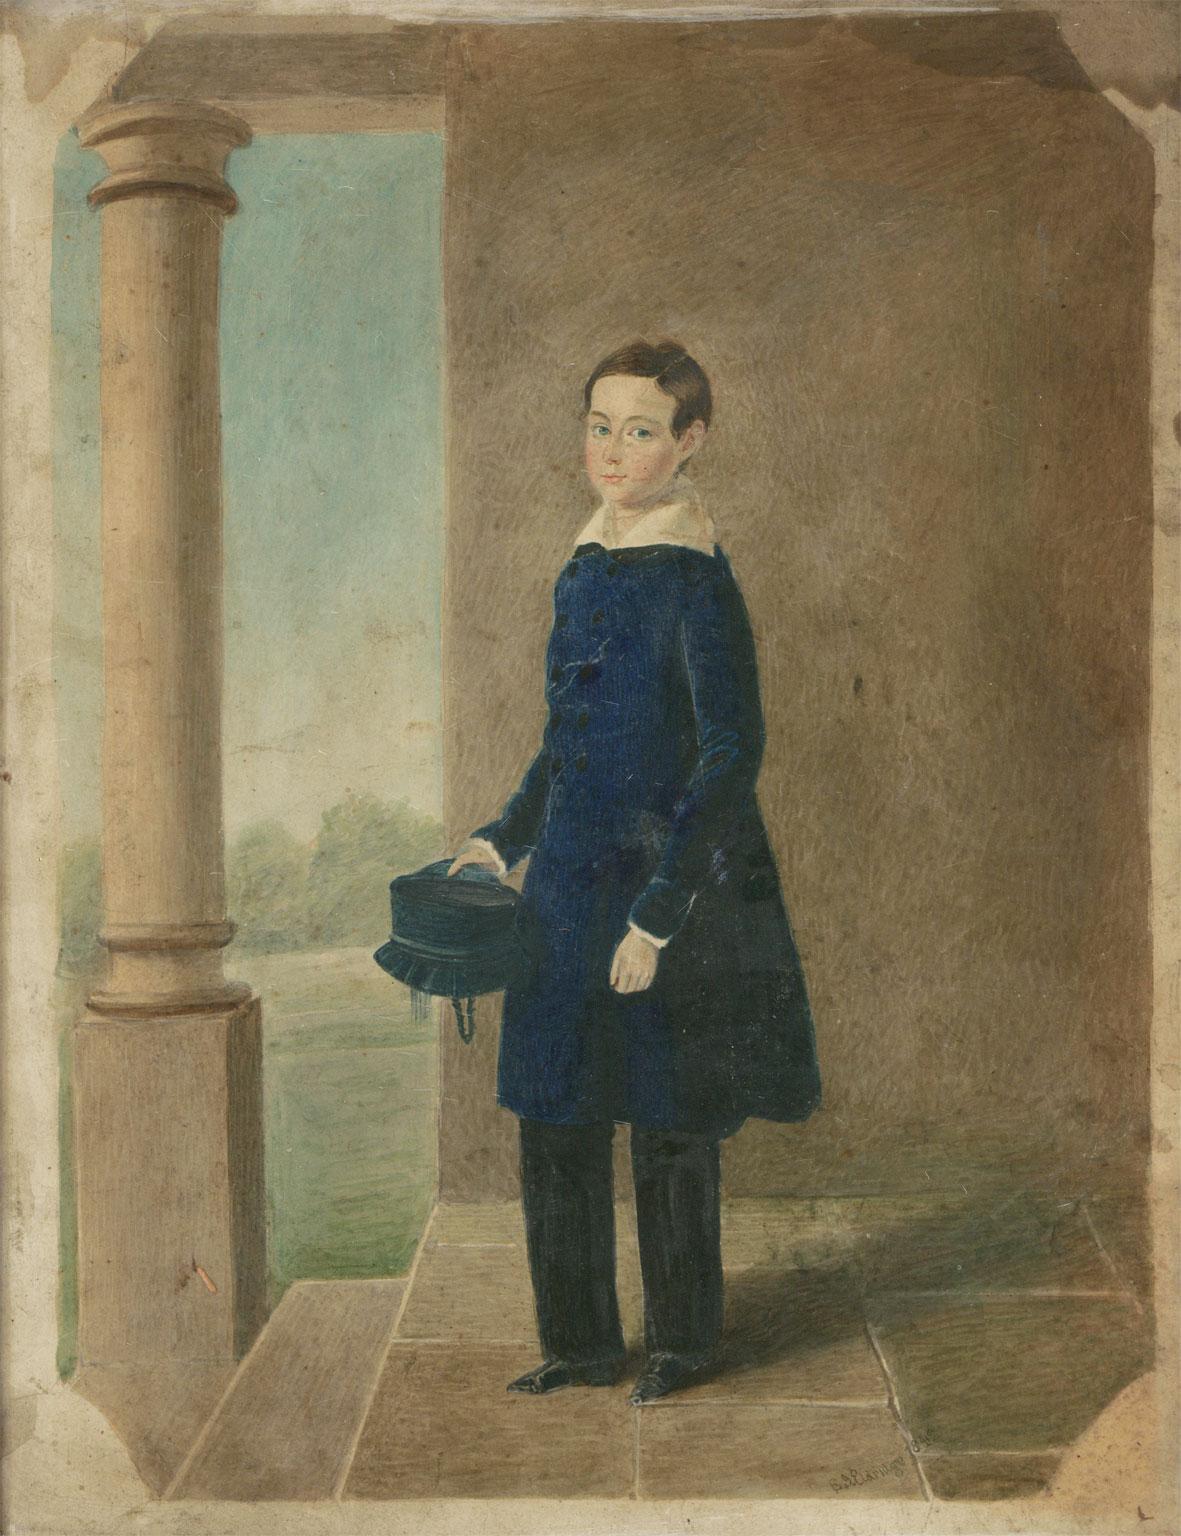 A very fine pair of early 19th Century watercolour portraits by the artist E.J. Eldridge, depicting both a portrait of a lady in a black dress with white lace accoutrements in an interior, and a young boy in his school uniform, depicted in a